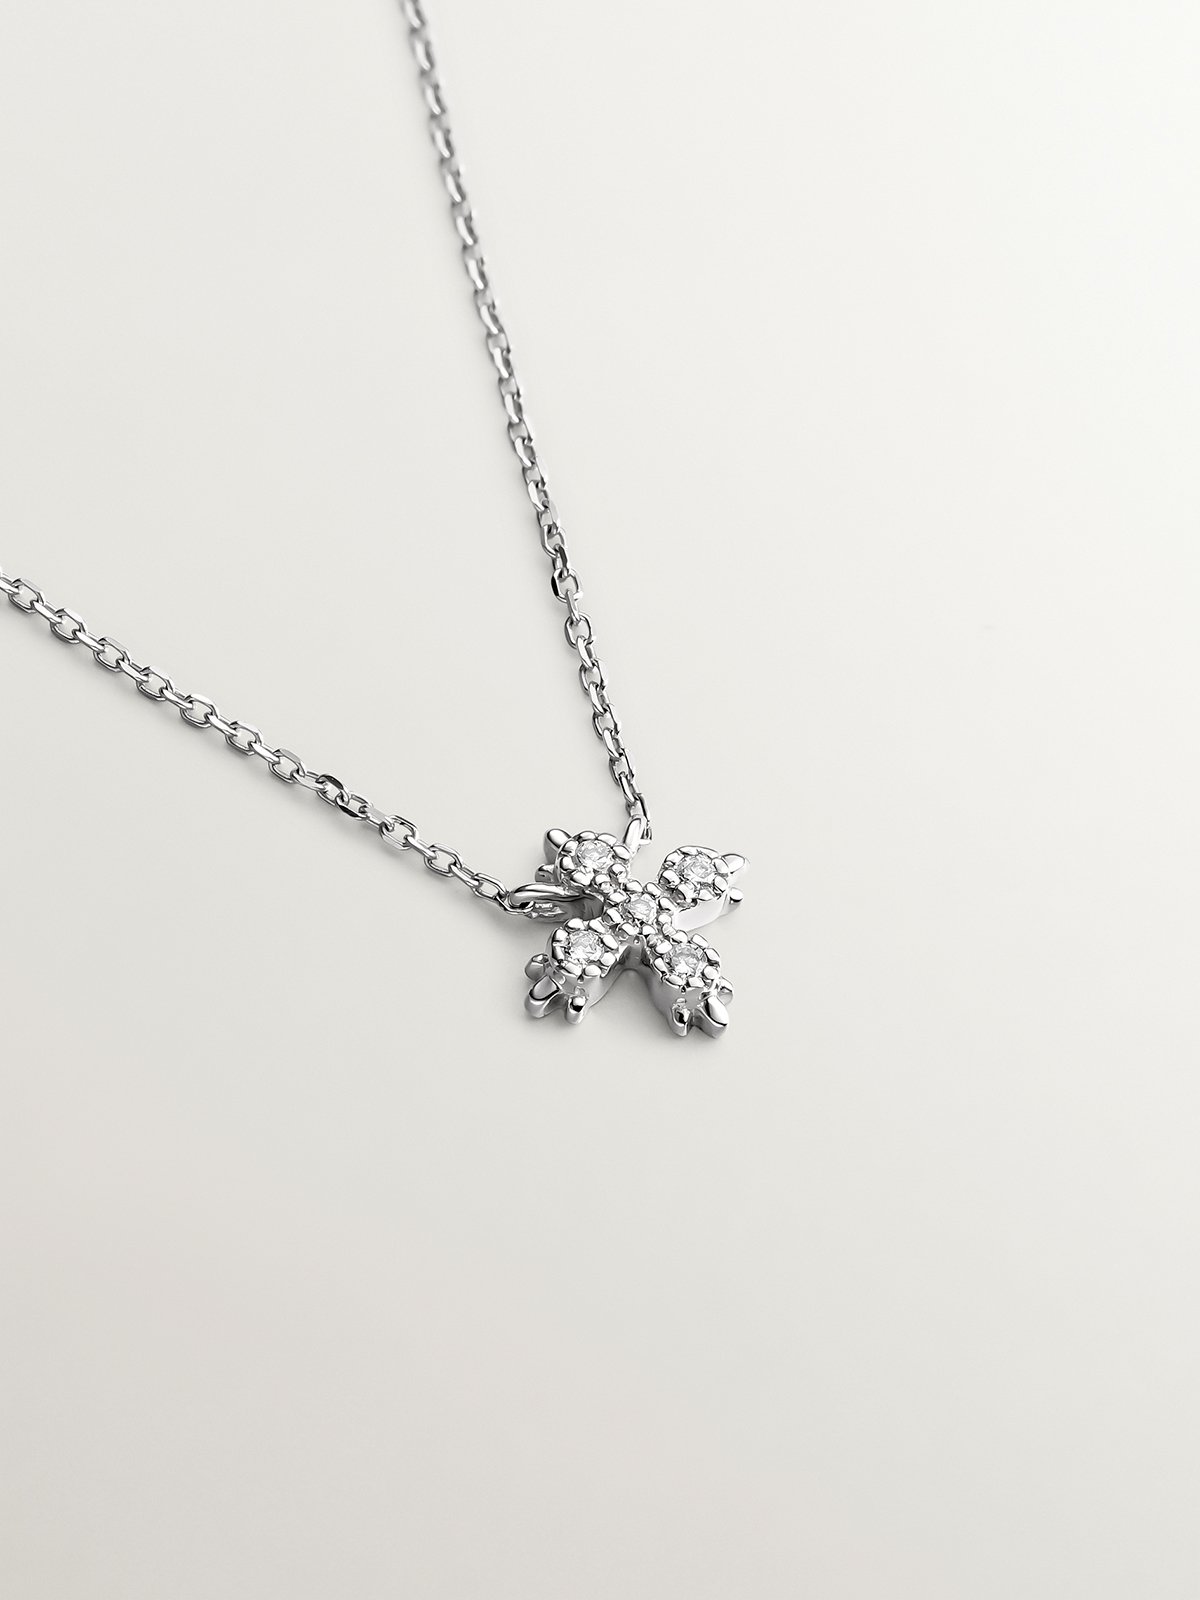 9K white gold pendant with cross featuring 0.03 cts white diamonds.